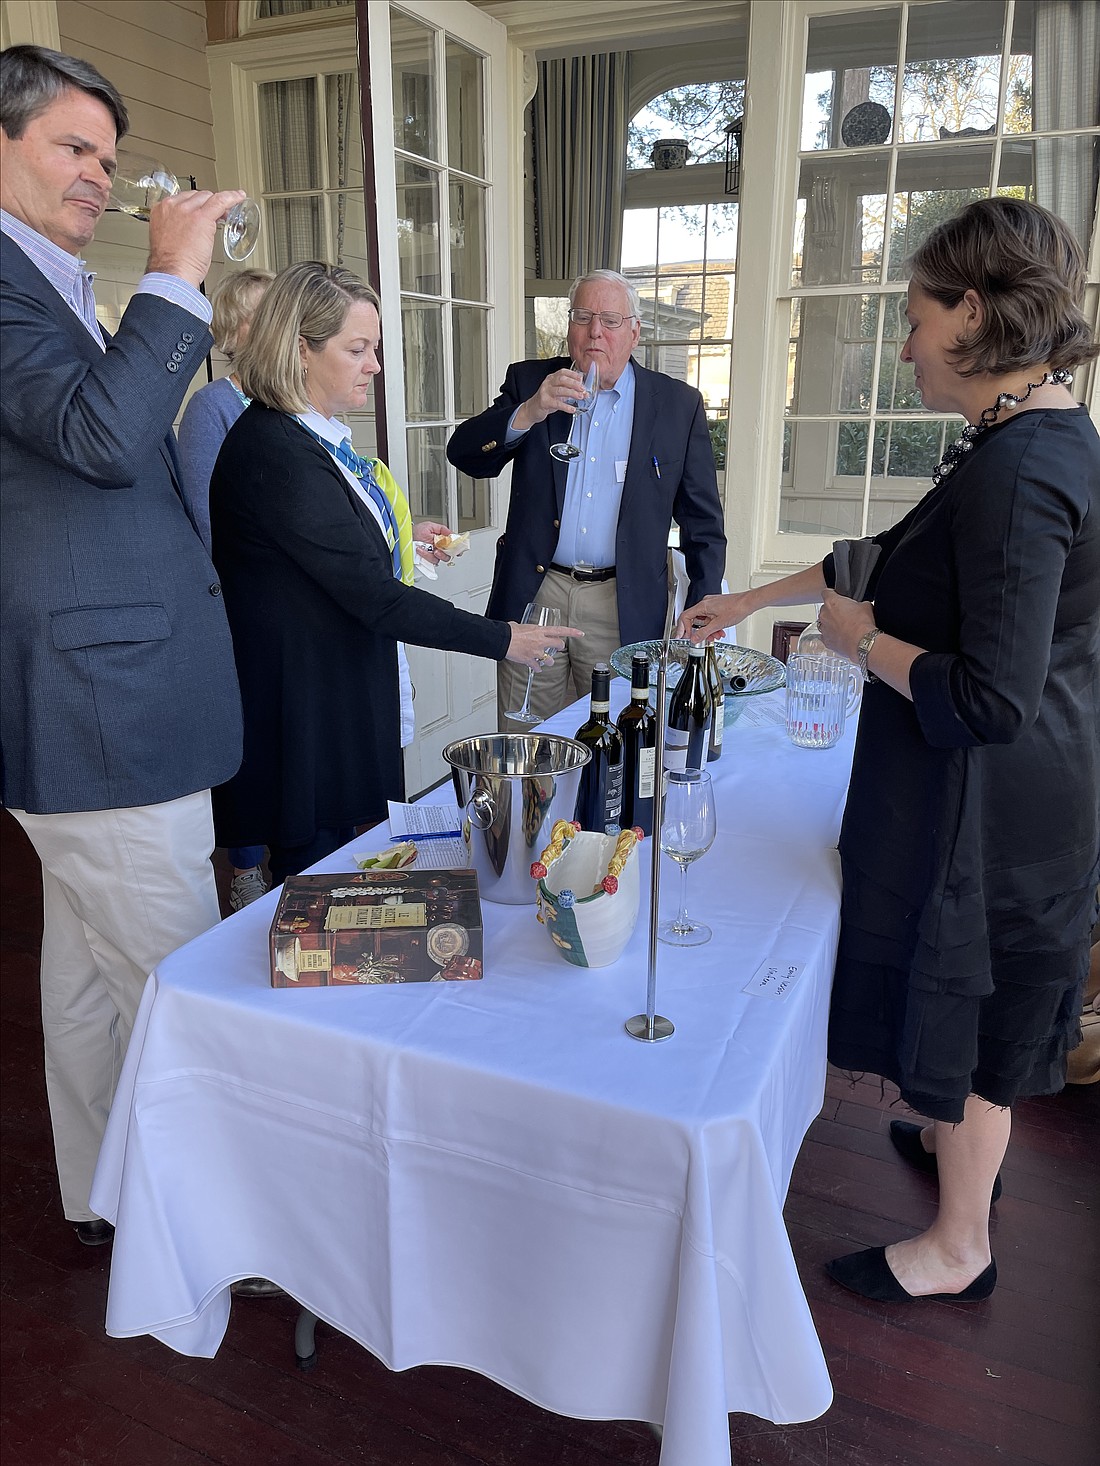 A previous wine tasting at Christ Church Greenwich. This year’s event will take place Fri. Apr. 5. See Nearby In-Person Events below for details.